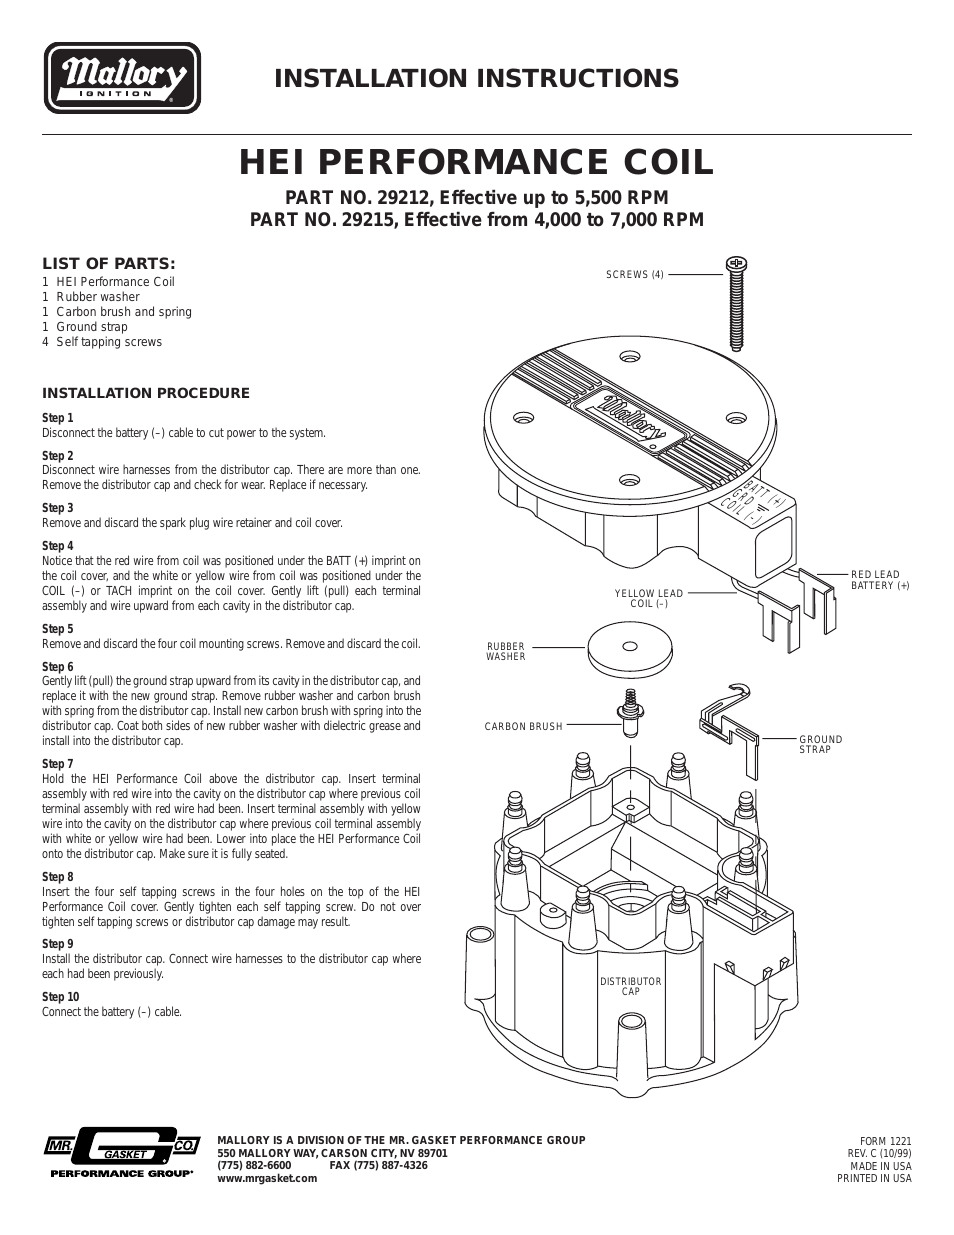 Mallory HEI PERFORMANCE COIL 29212_29215